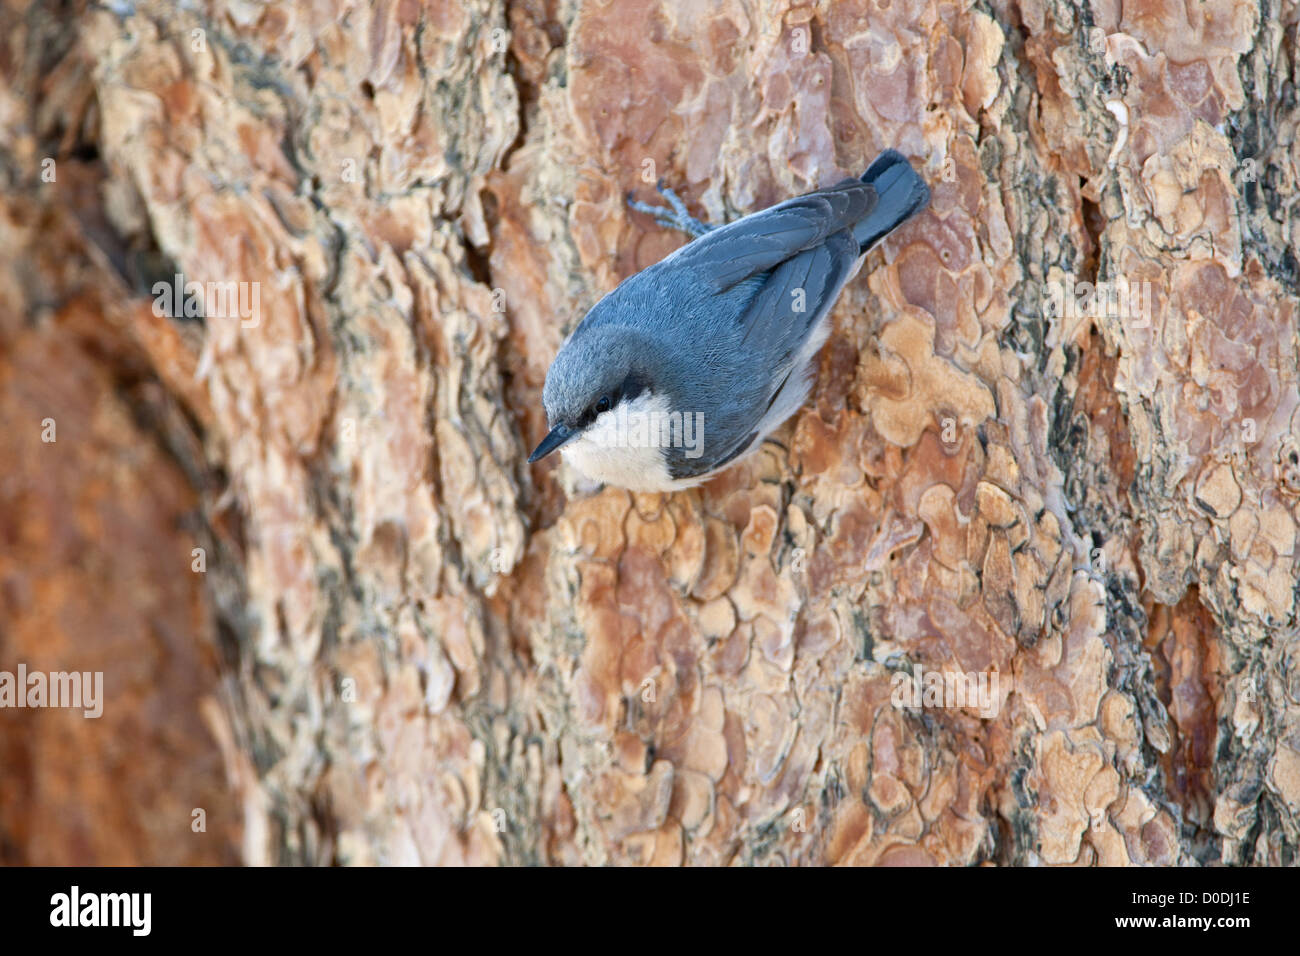 Pygmy Nuthatch uccello songbird songbirds Ornitologia Scienza natura natura natura ambiente nuthatches Foto Stock